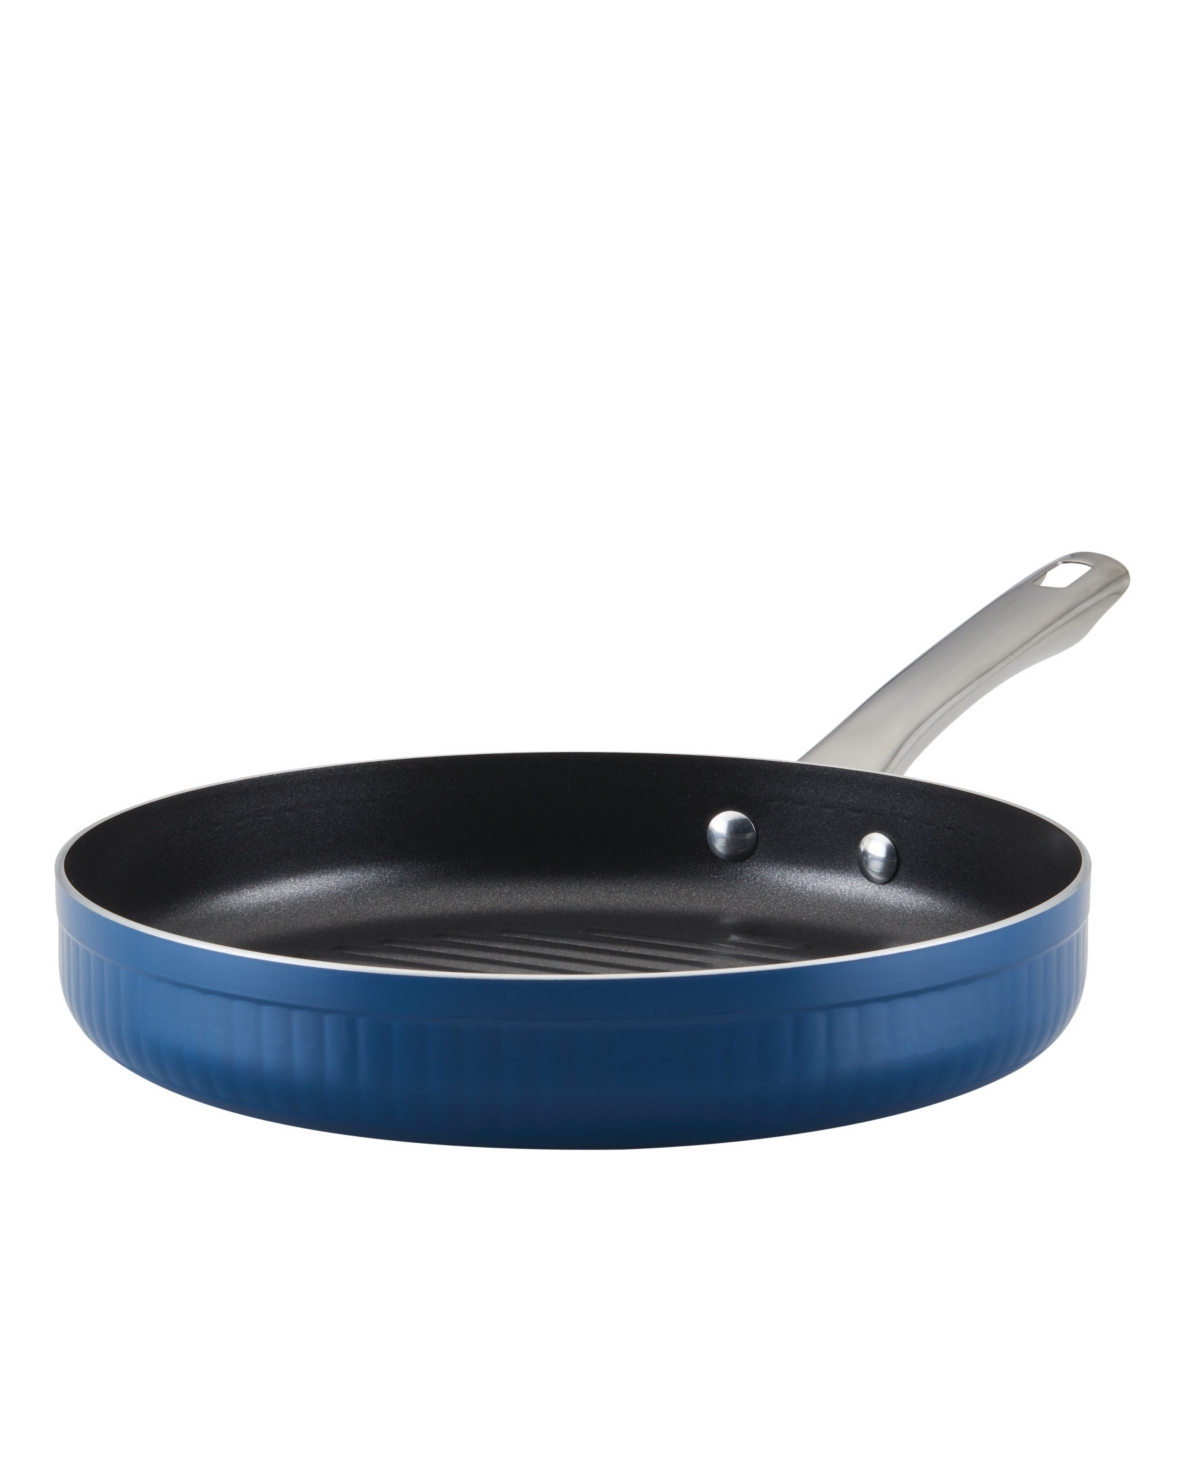 Farberware Style Aluminum Nonstick 11.25" Cookware Deep Round Grill Pan In Blue